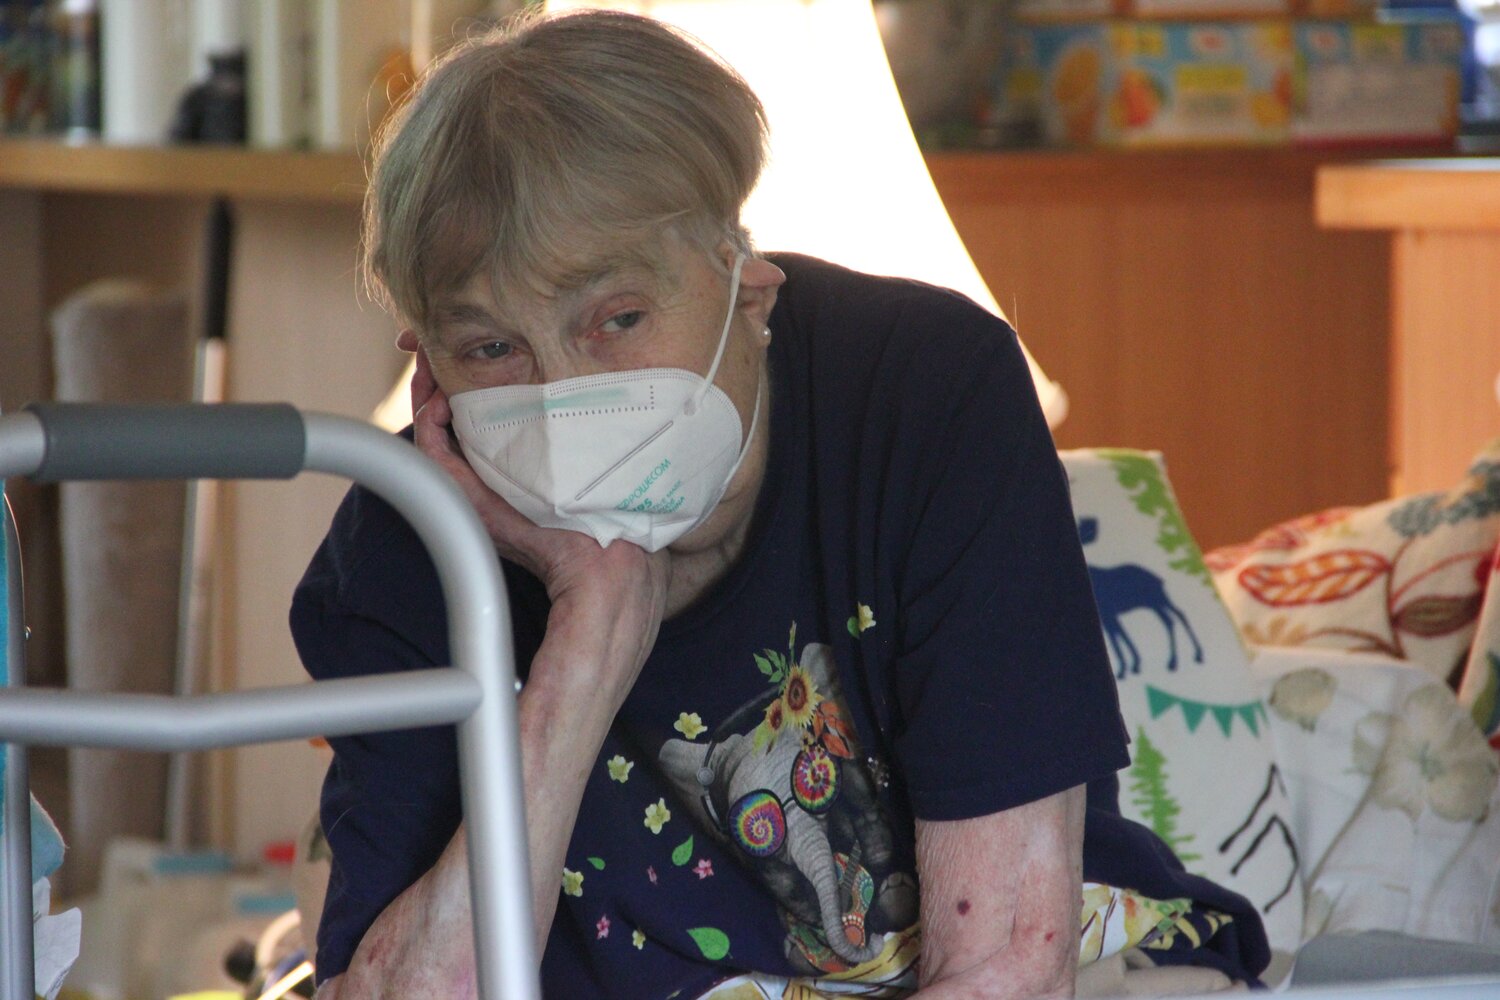 Christina Needham, 70, at her home in Blaine on May 22, following PeaceHealth’s decision to severely reduce its outpatient palliative care program in Whatcom County. Needham, who has stage four cancer and is homebound, has relied on palliative care for pain management and emotional support.